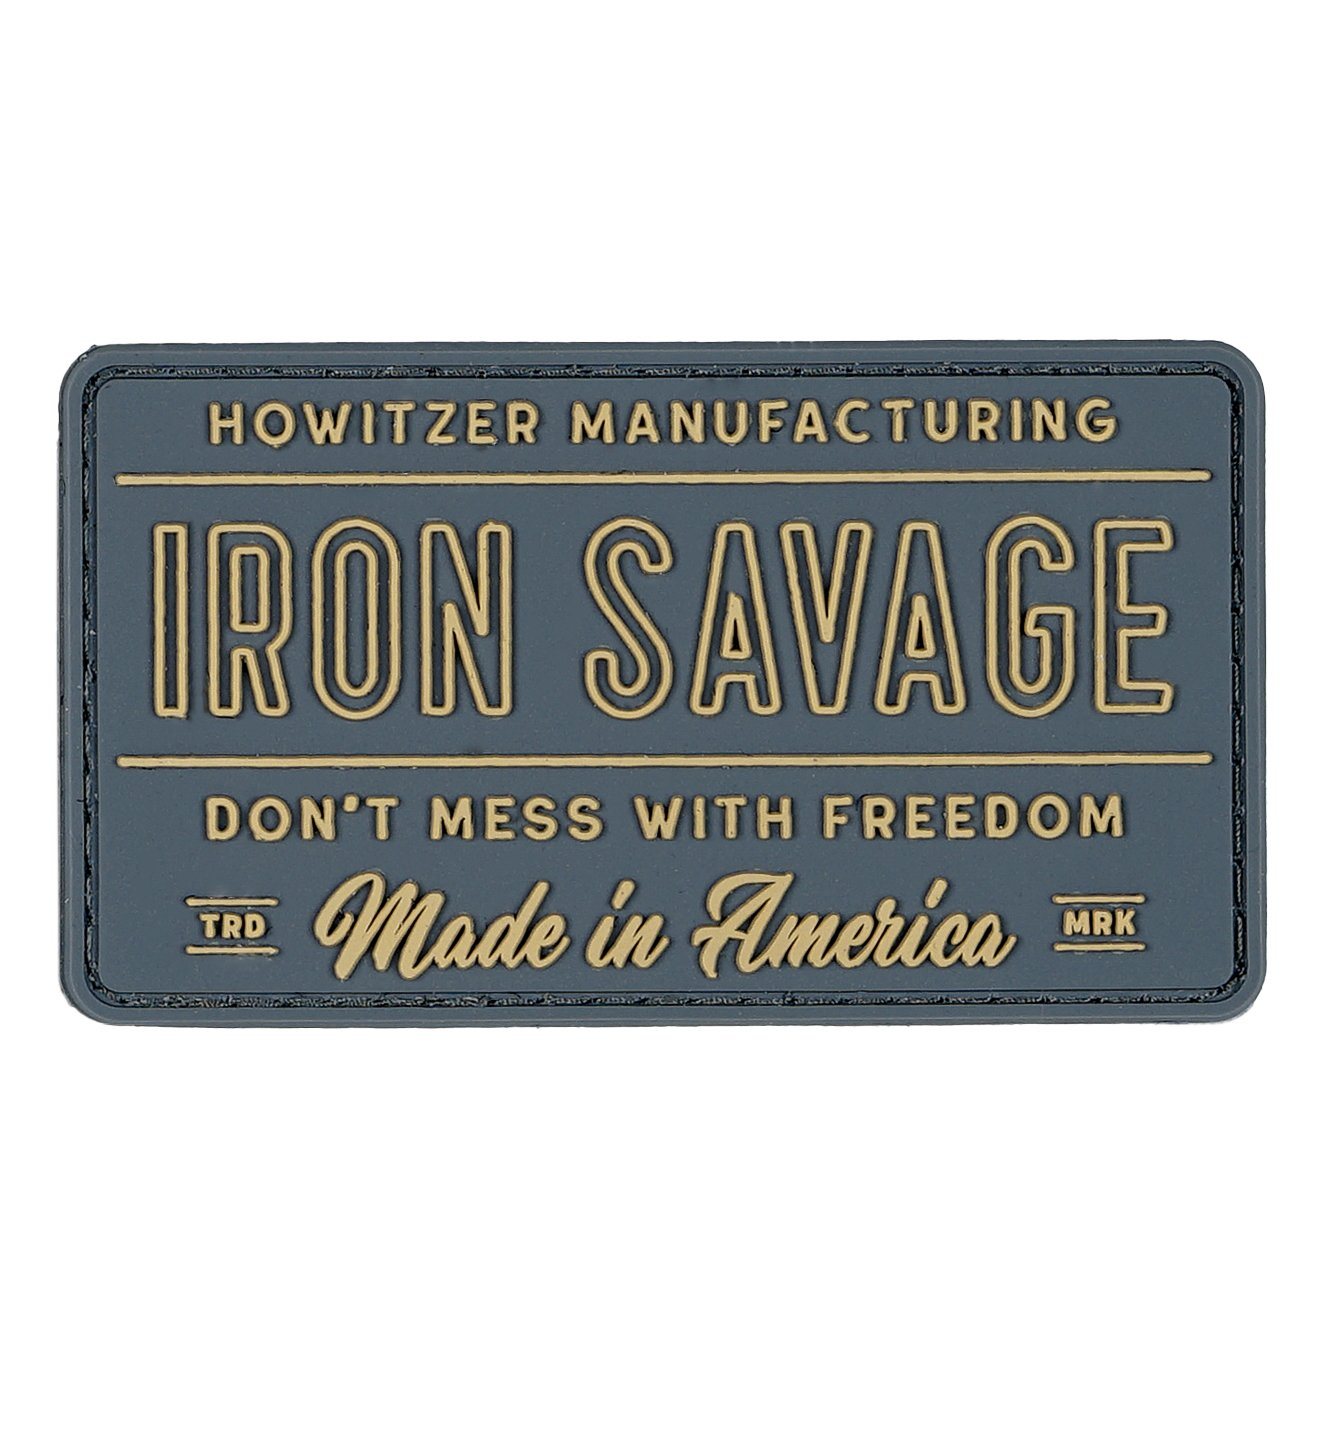 Accessories - Iron Savage Morale Patch